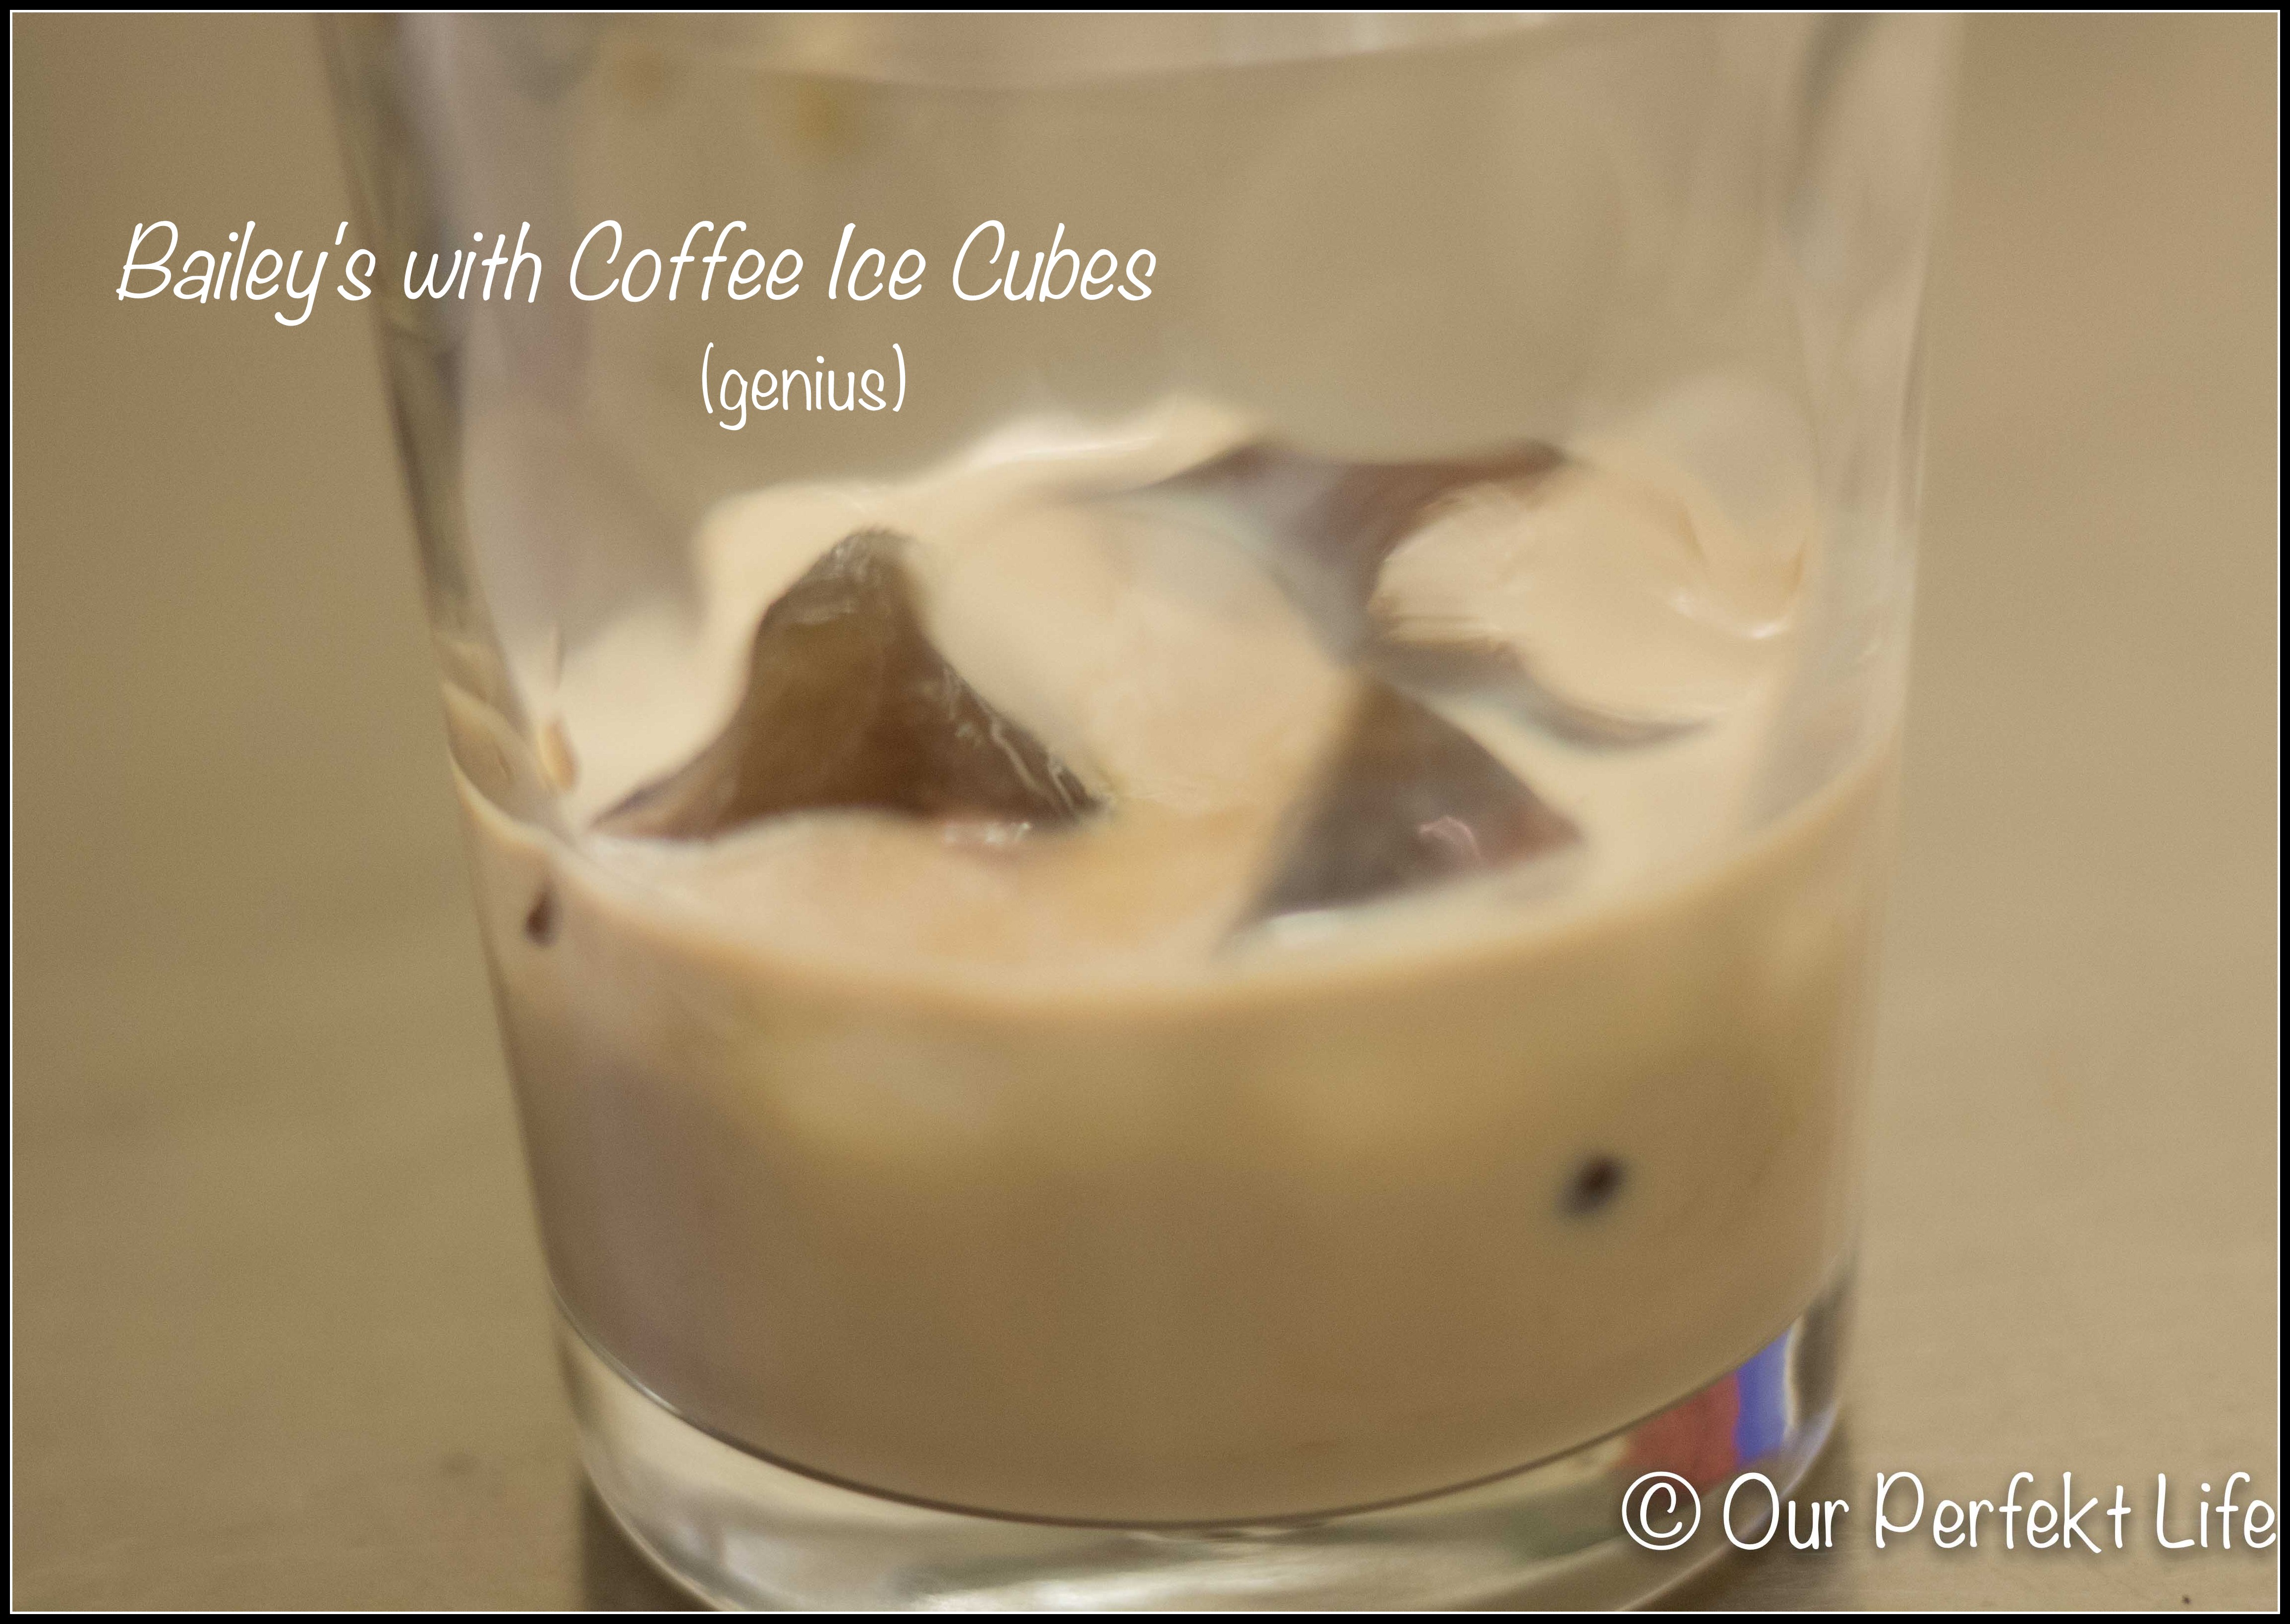 Baileys with Coffee Ice Cubes